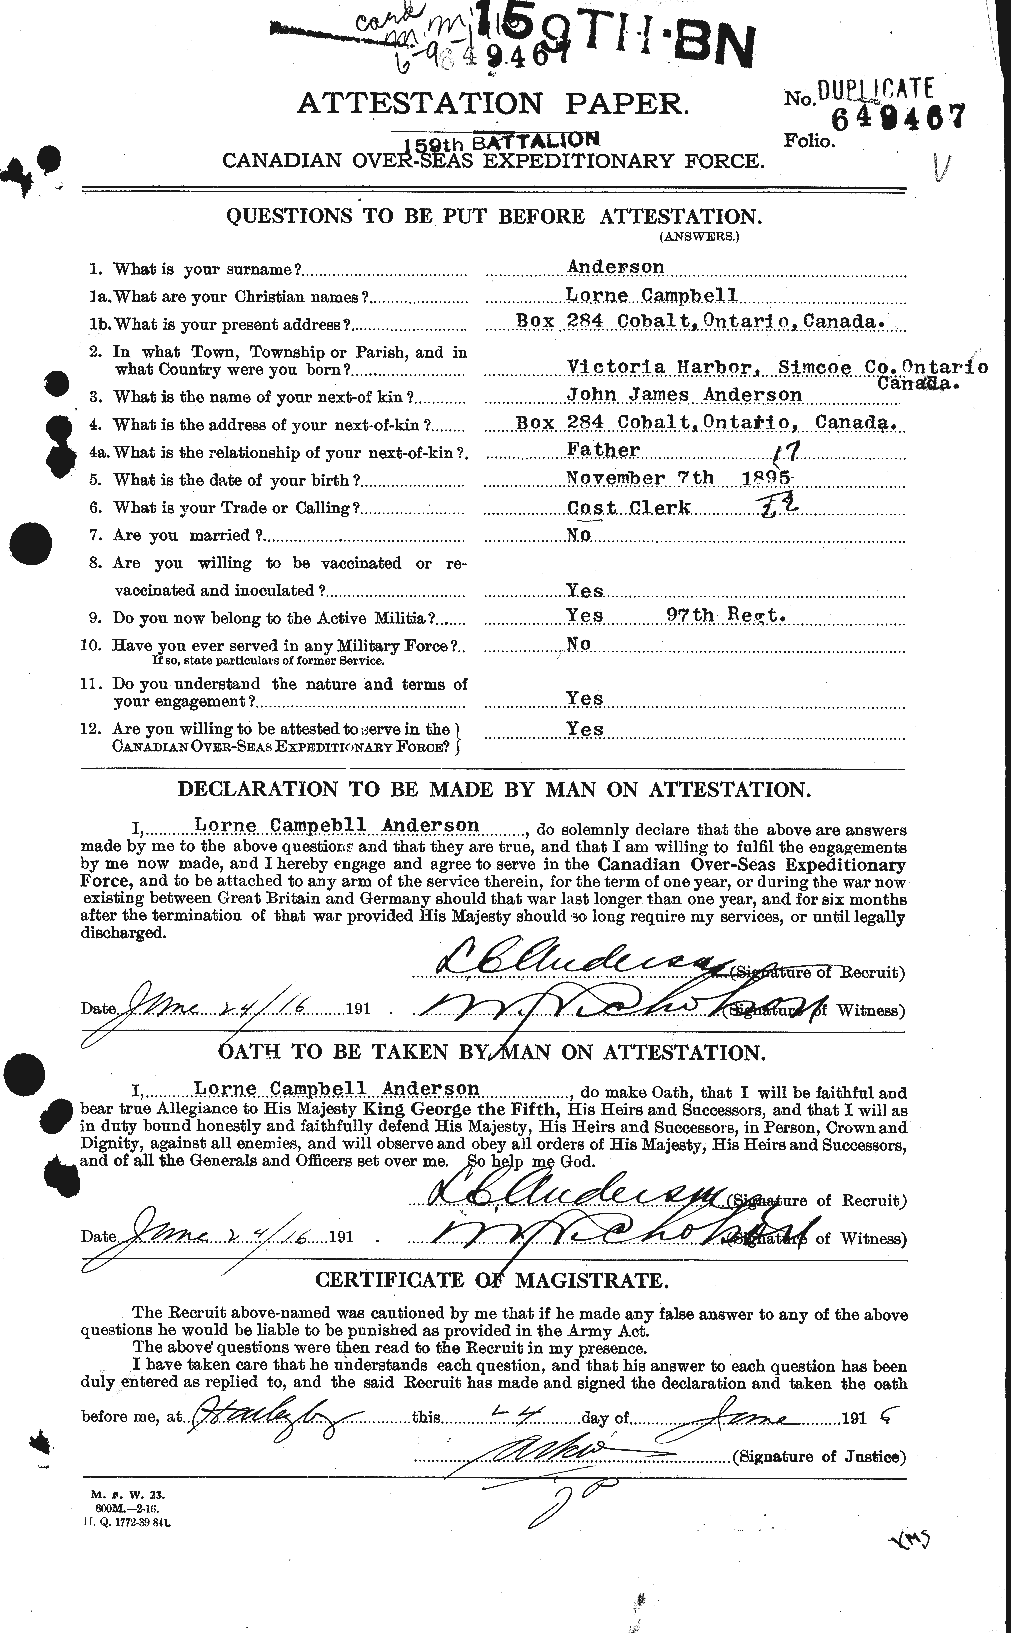 Personnel Records of the First World War - CEF 207510a